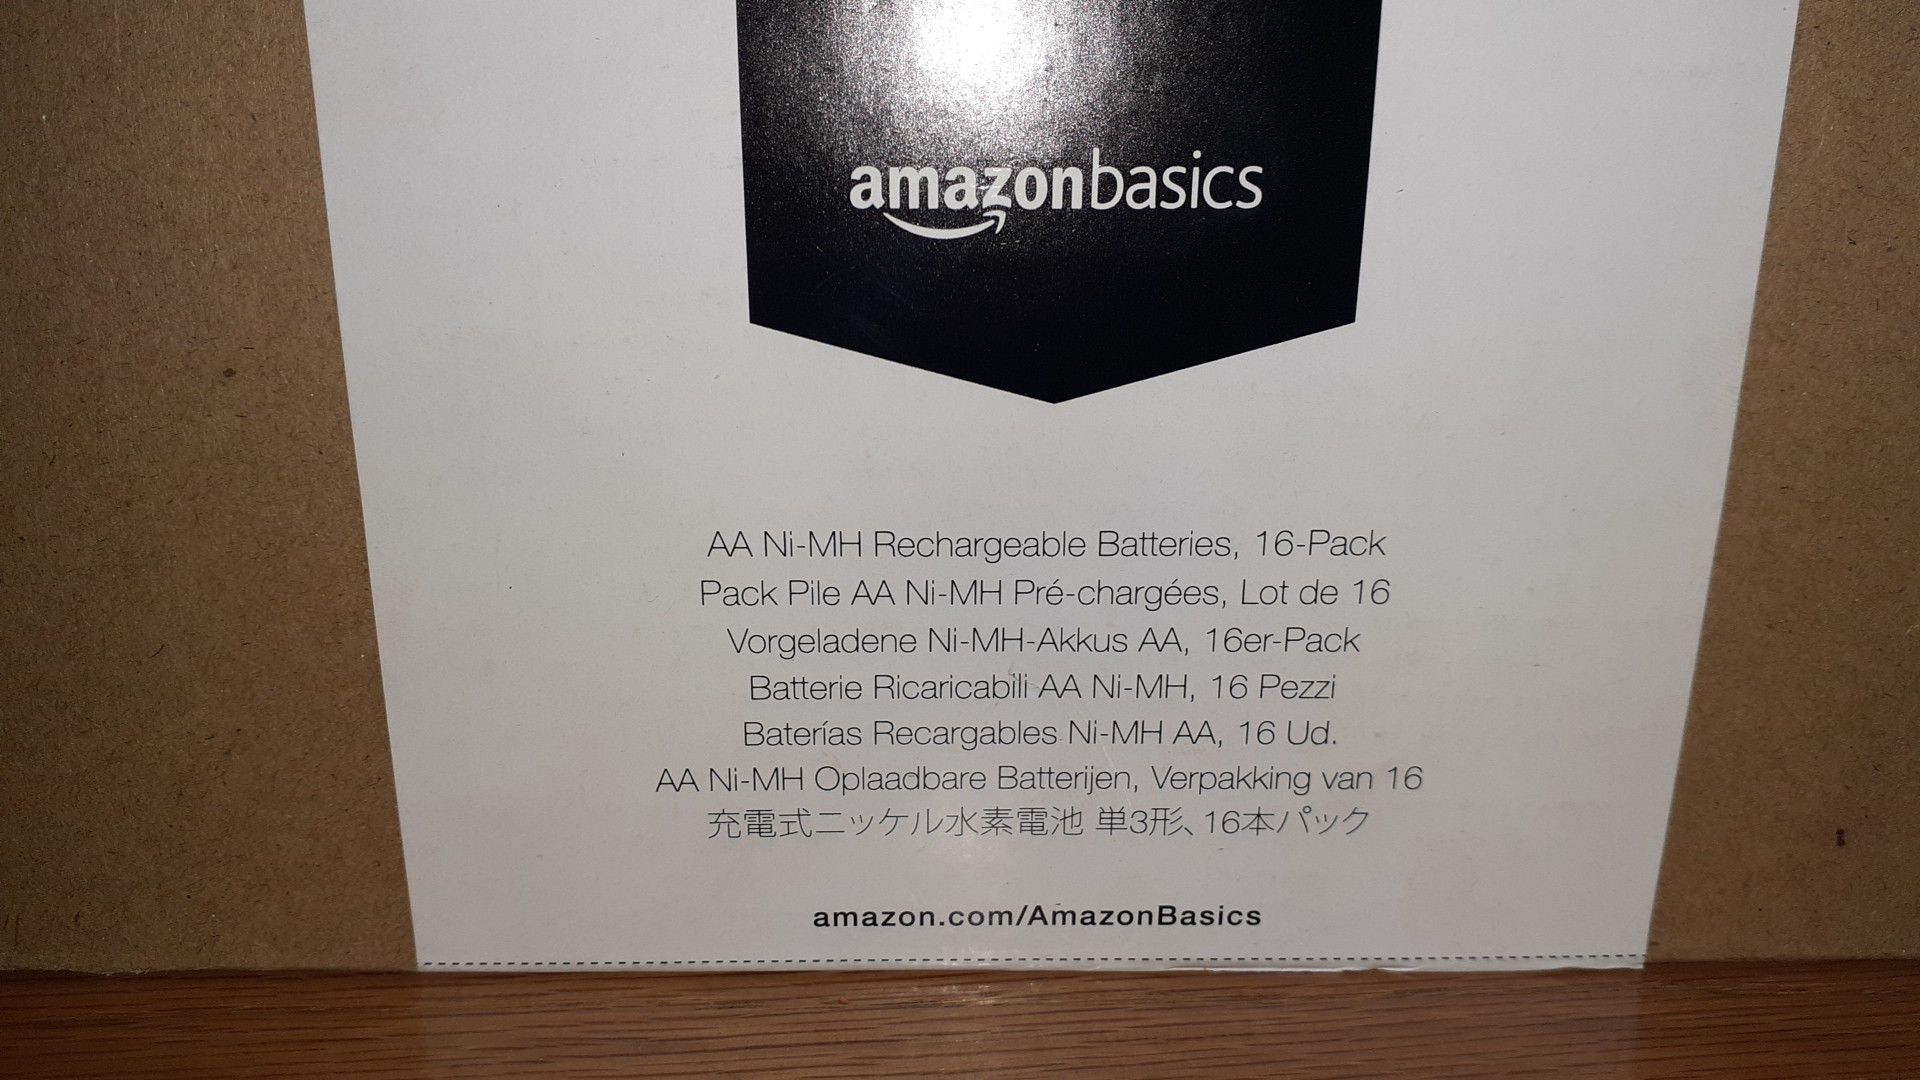 AA Ni-MH Rechargeable Batteries 16 pack